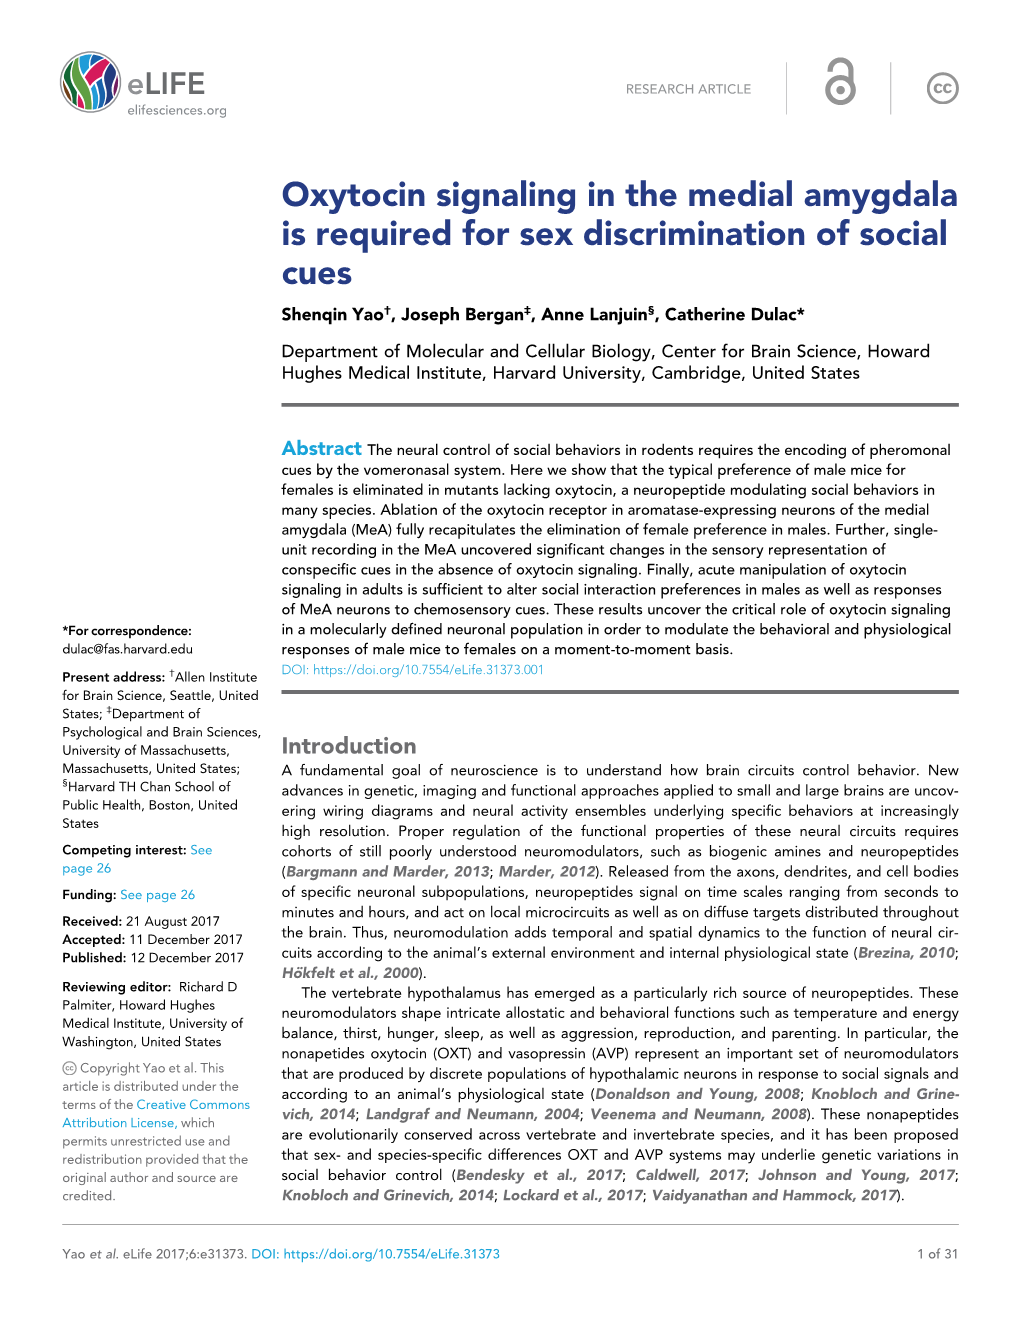 Oxytocin Signaling in the Medial Amygdala Is Required for Sex Discrimination of Social Cues Shenqin Yao†, Joseph Bergan‡, Anne Lanjuin§, Catherine Dulac*